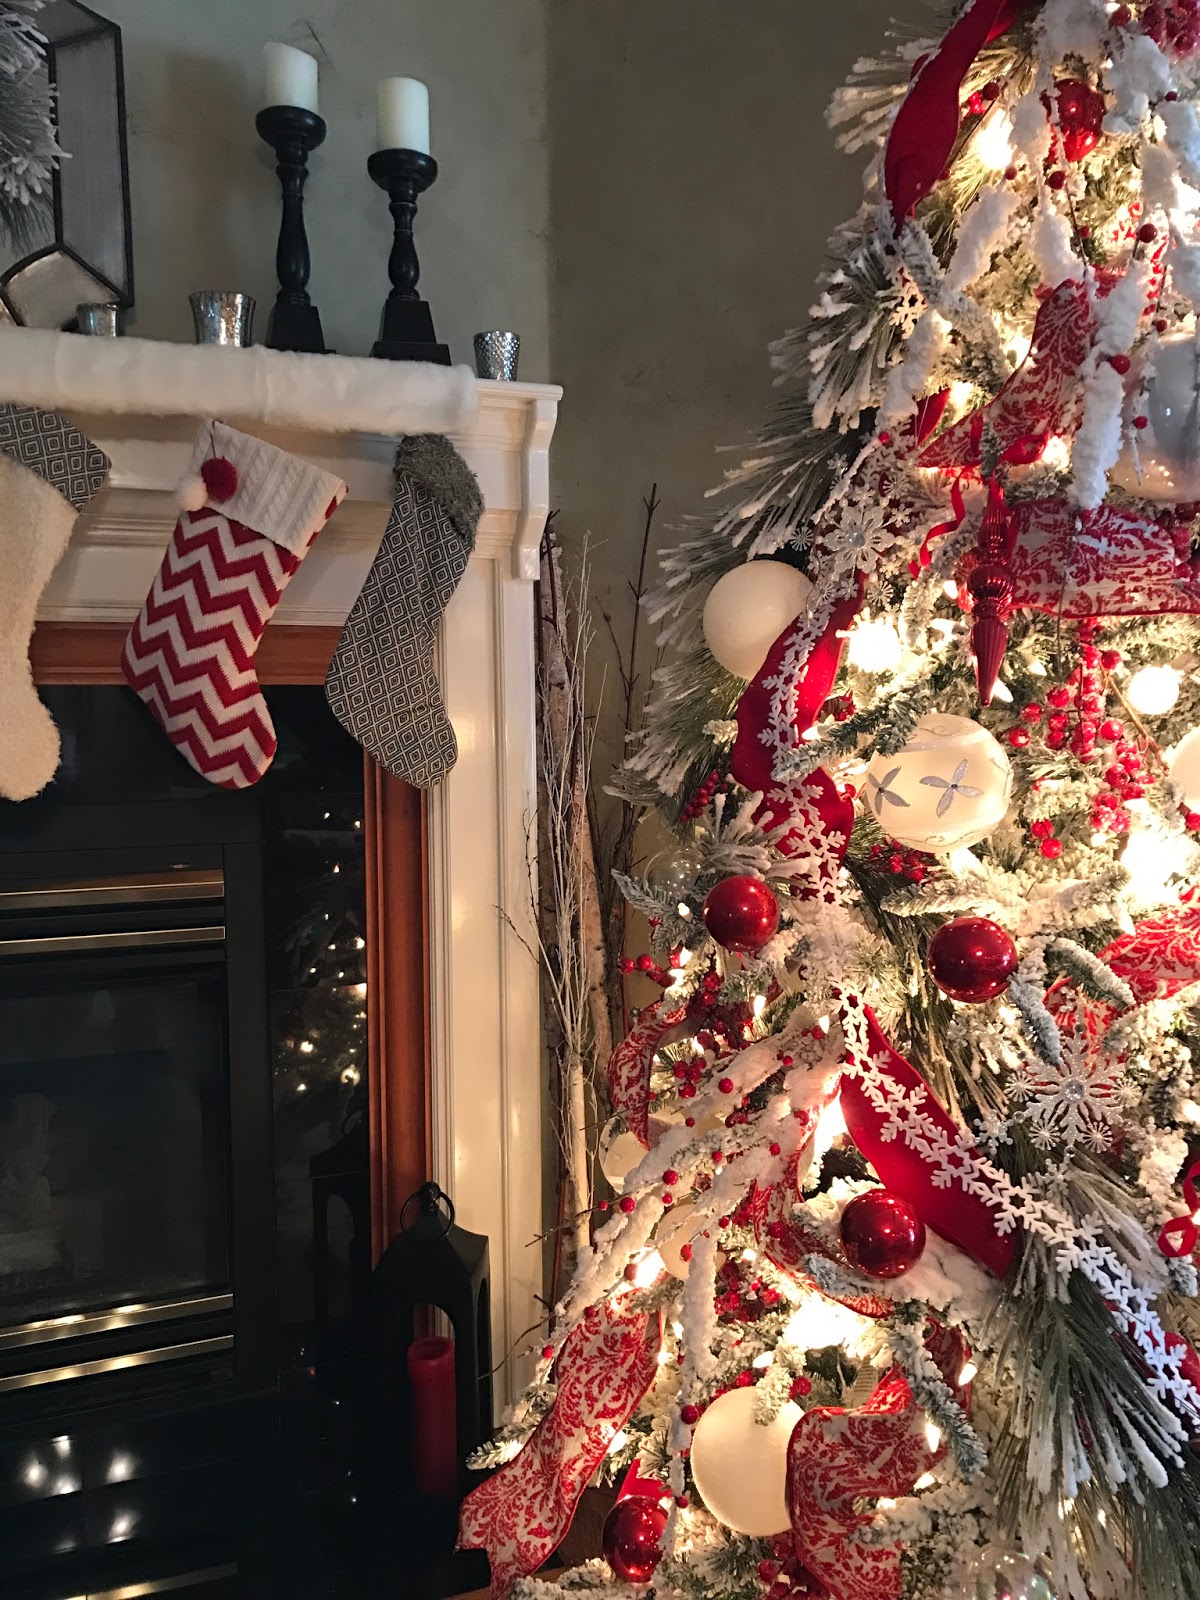 A favorite tradition at Christmastime is hanging our stockings in anticipation of waking up early on Christmas morning to find them filled to the brim with